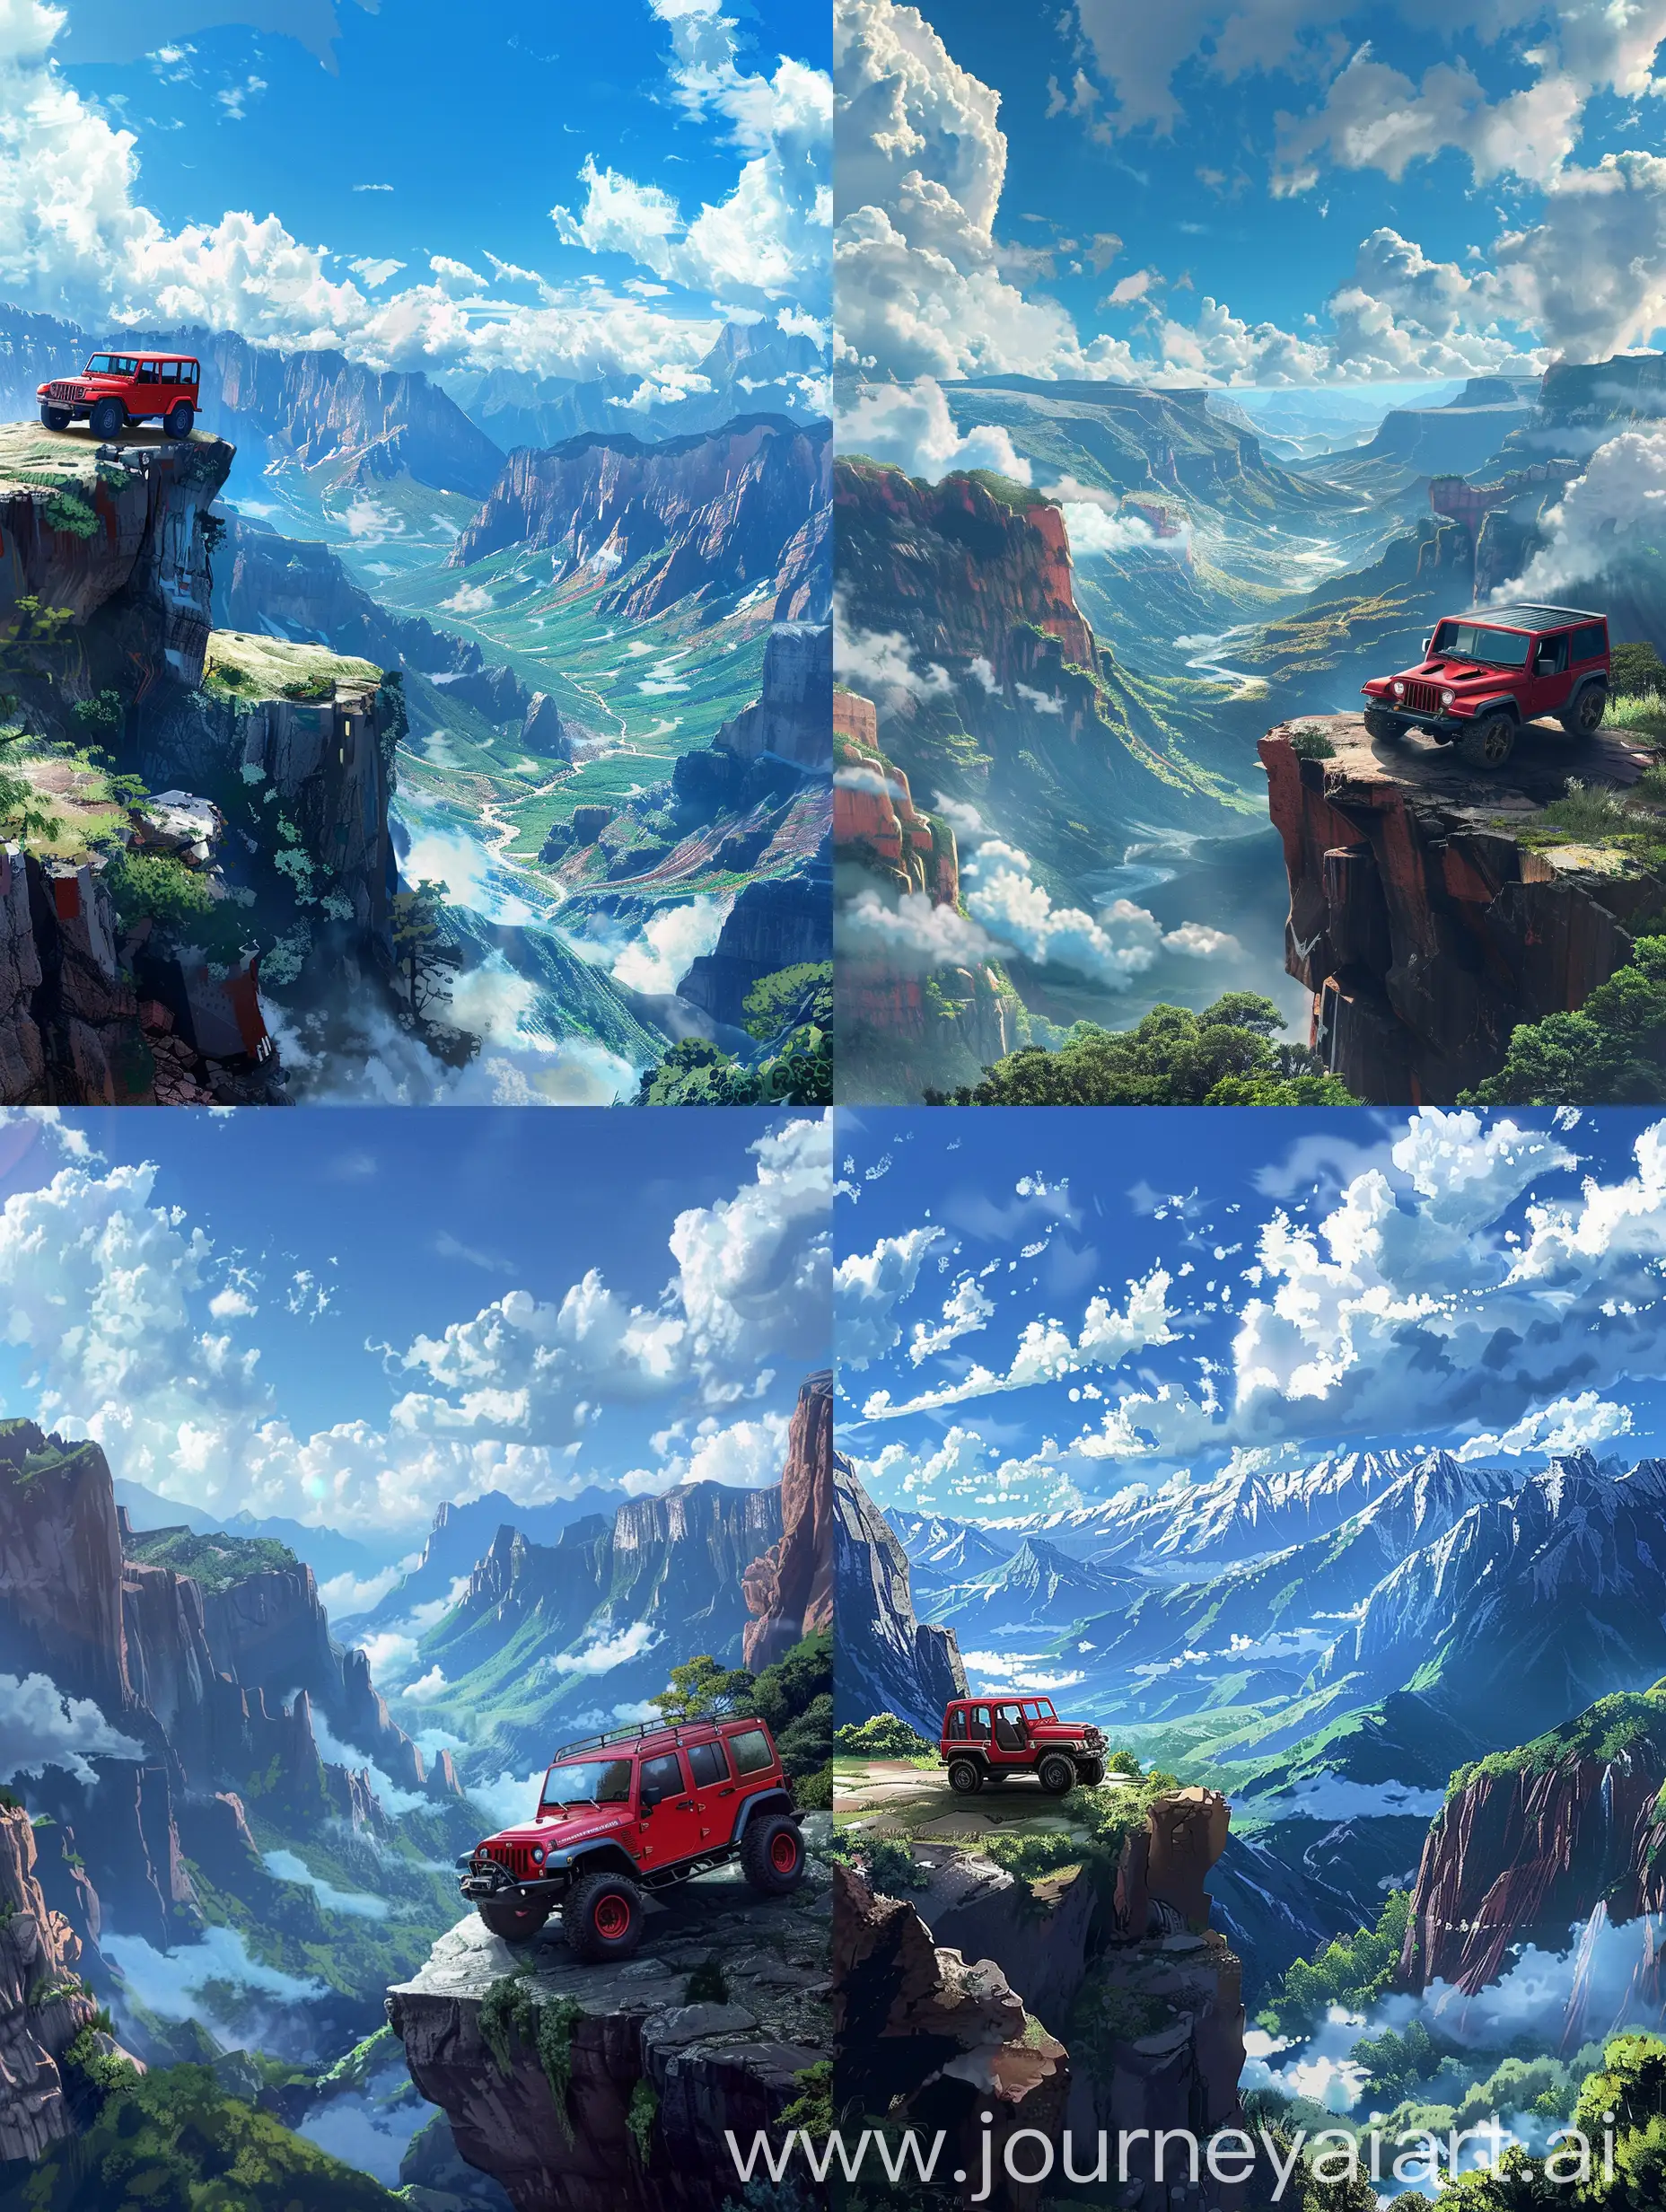 Red-Jeep-Perched-on-a-Cliff-Overlooking-a-Valley-with-Majestic-Mountains